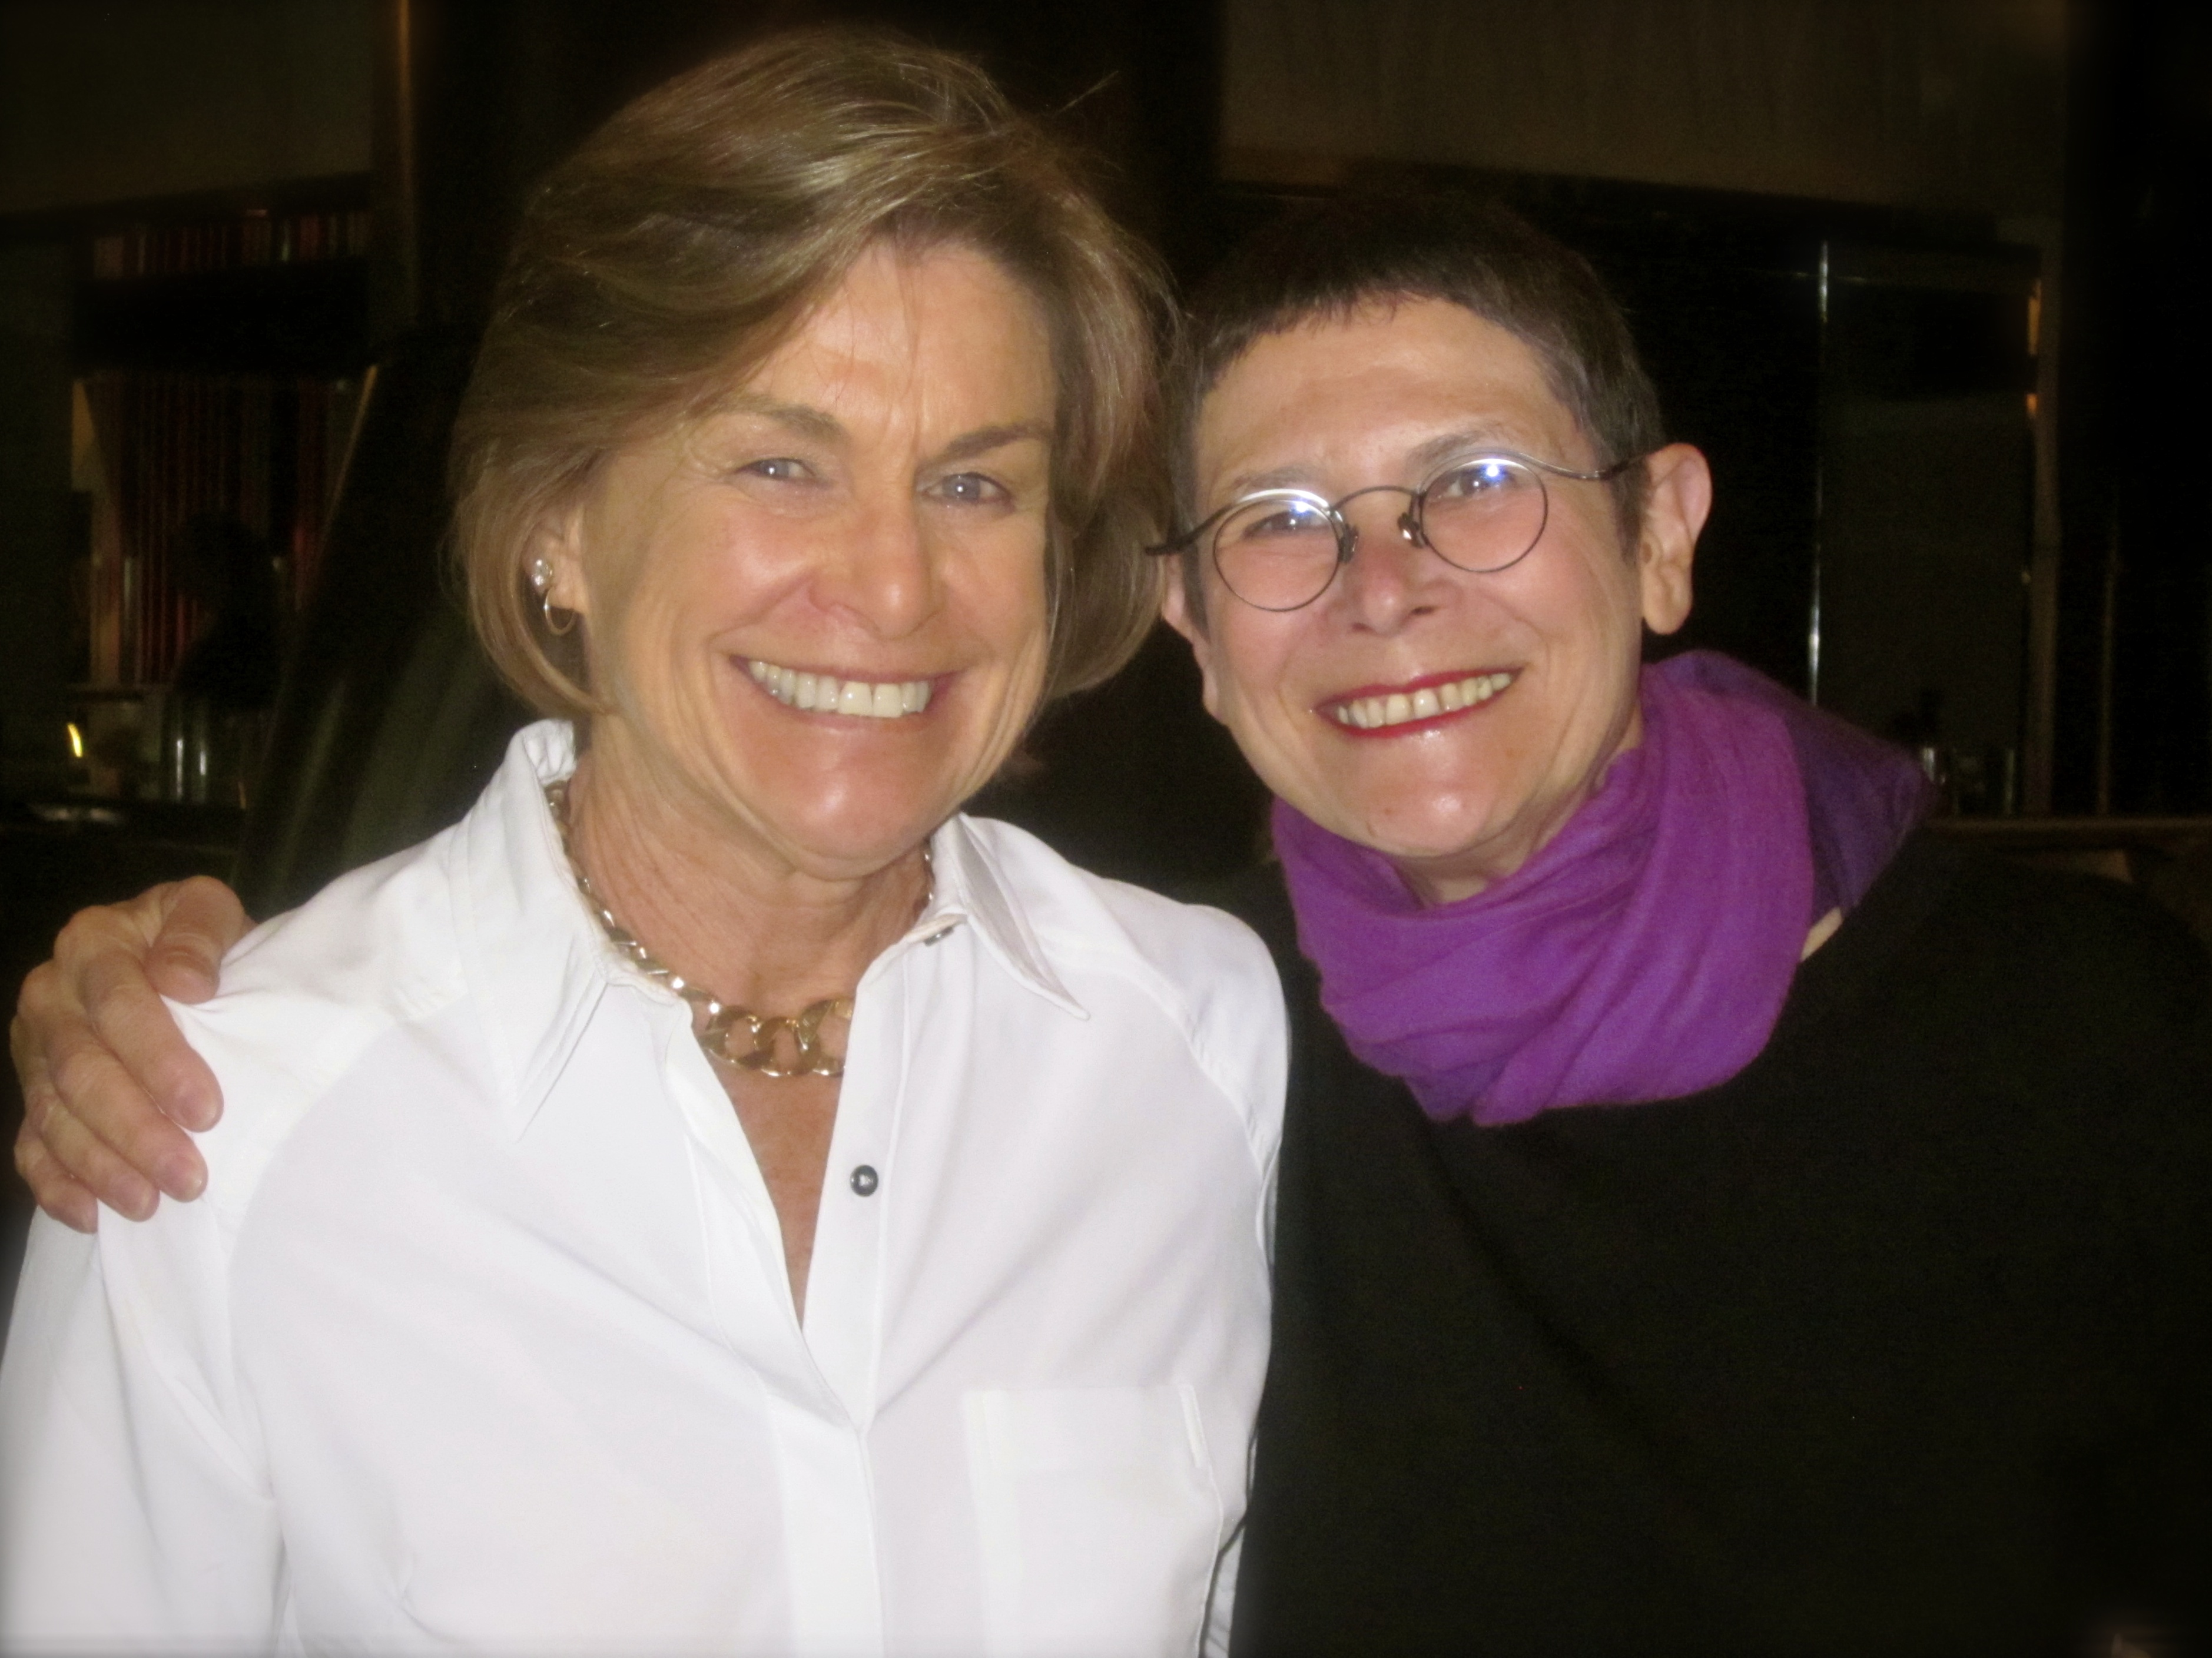 With Dorie Greenspan who was the keynote speaker at last year's IFBC in Seattle.